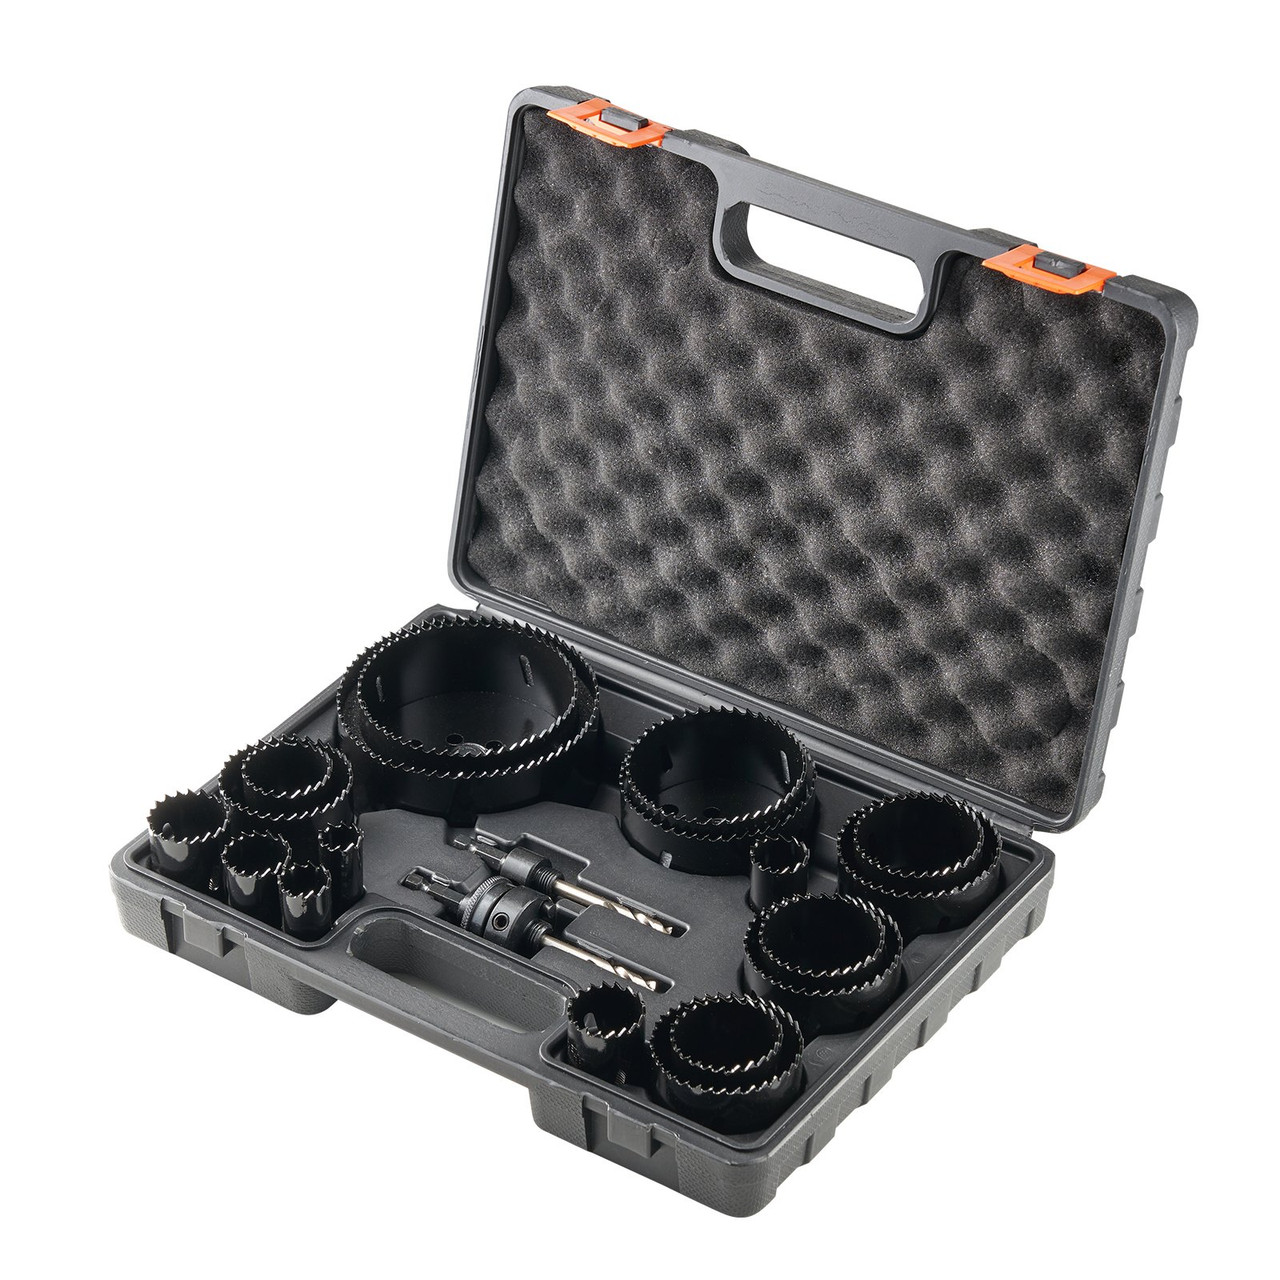 VEVOR Hole Saw Kit, 18 PCS Saw Blades, 6 Drill Bits, 1 Hex Wrench, General Purpose Size from 3/4" to 4-1/2", Bi Metal M42 Hole Saw Set with Carrying Case, Ideal for Wood Board, Plastic and Iron Plate